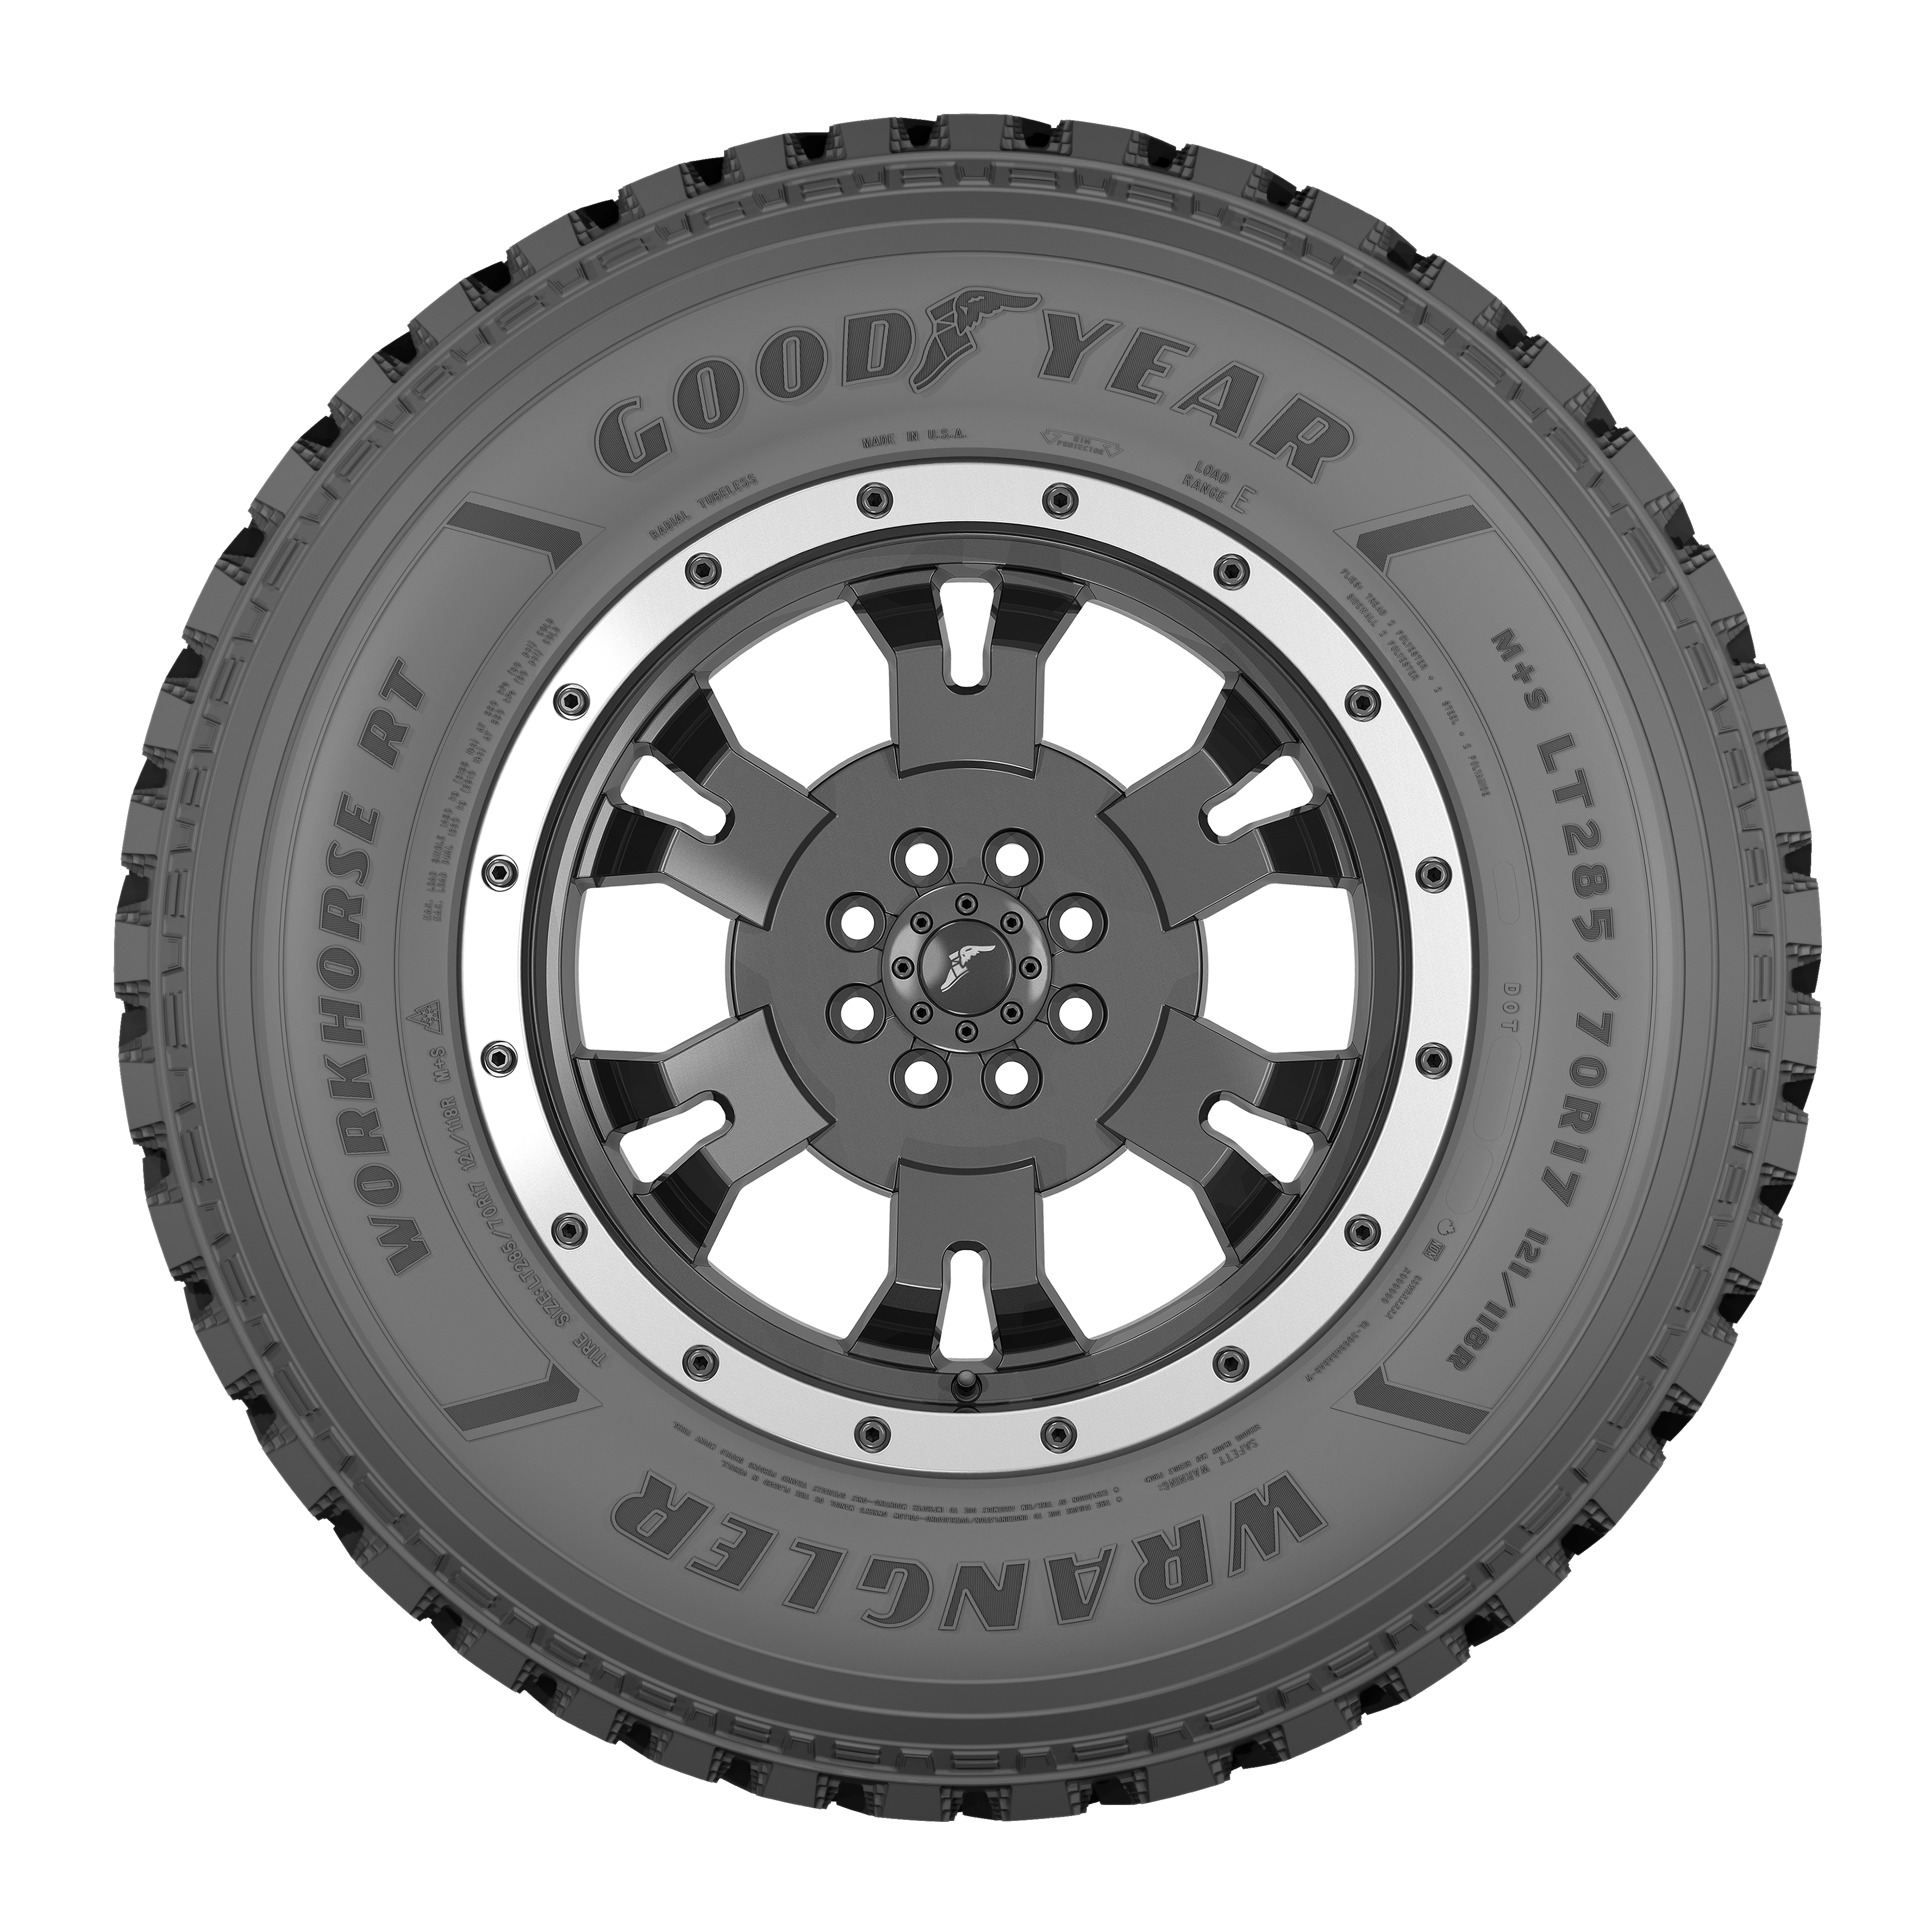 GOODYEAR'S NEW WRANGLER WORKHORSE POWERLINE DELIVERS HARDWORKING  DEPENDABILITY ON AND OFF ROAD